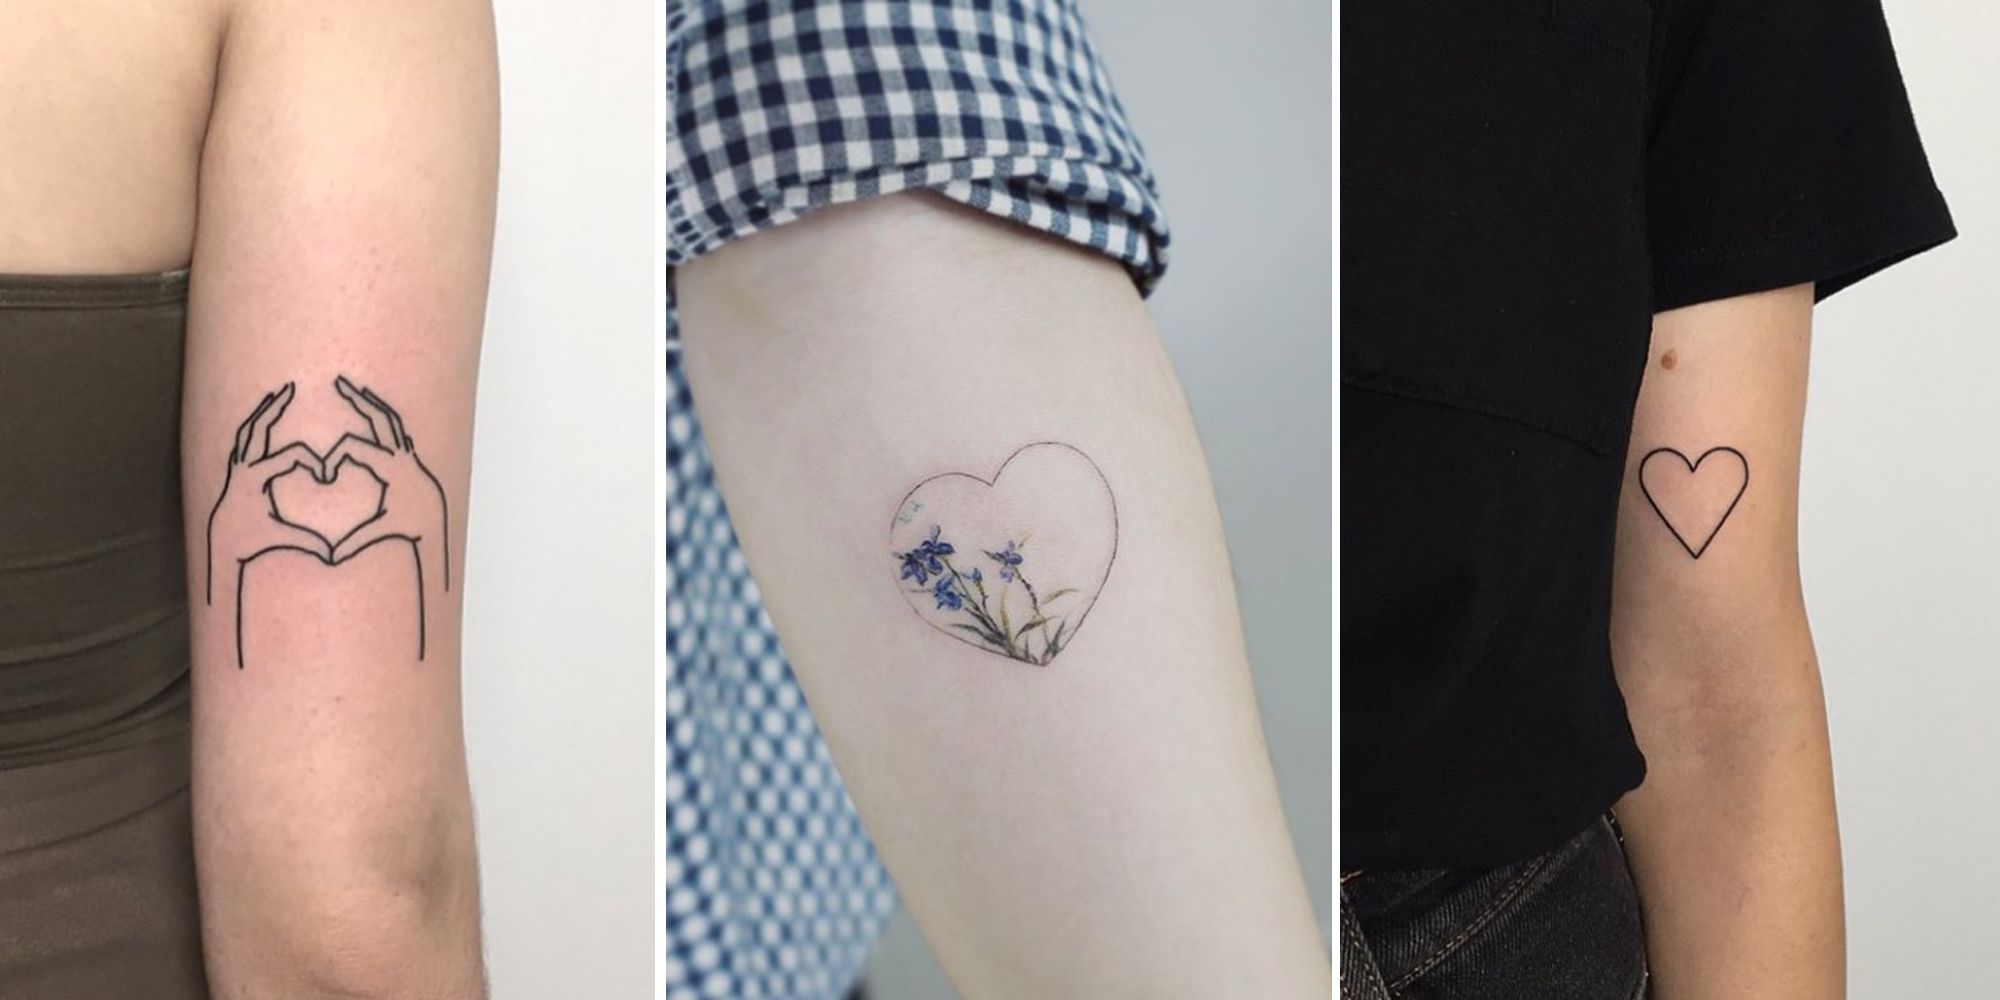 heart tattoos - 14 heart tattoo designs to inspire your next ink